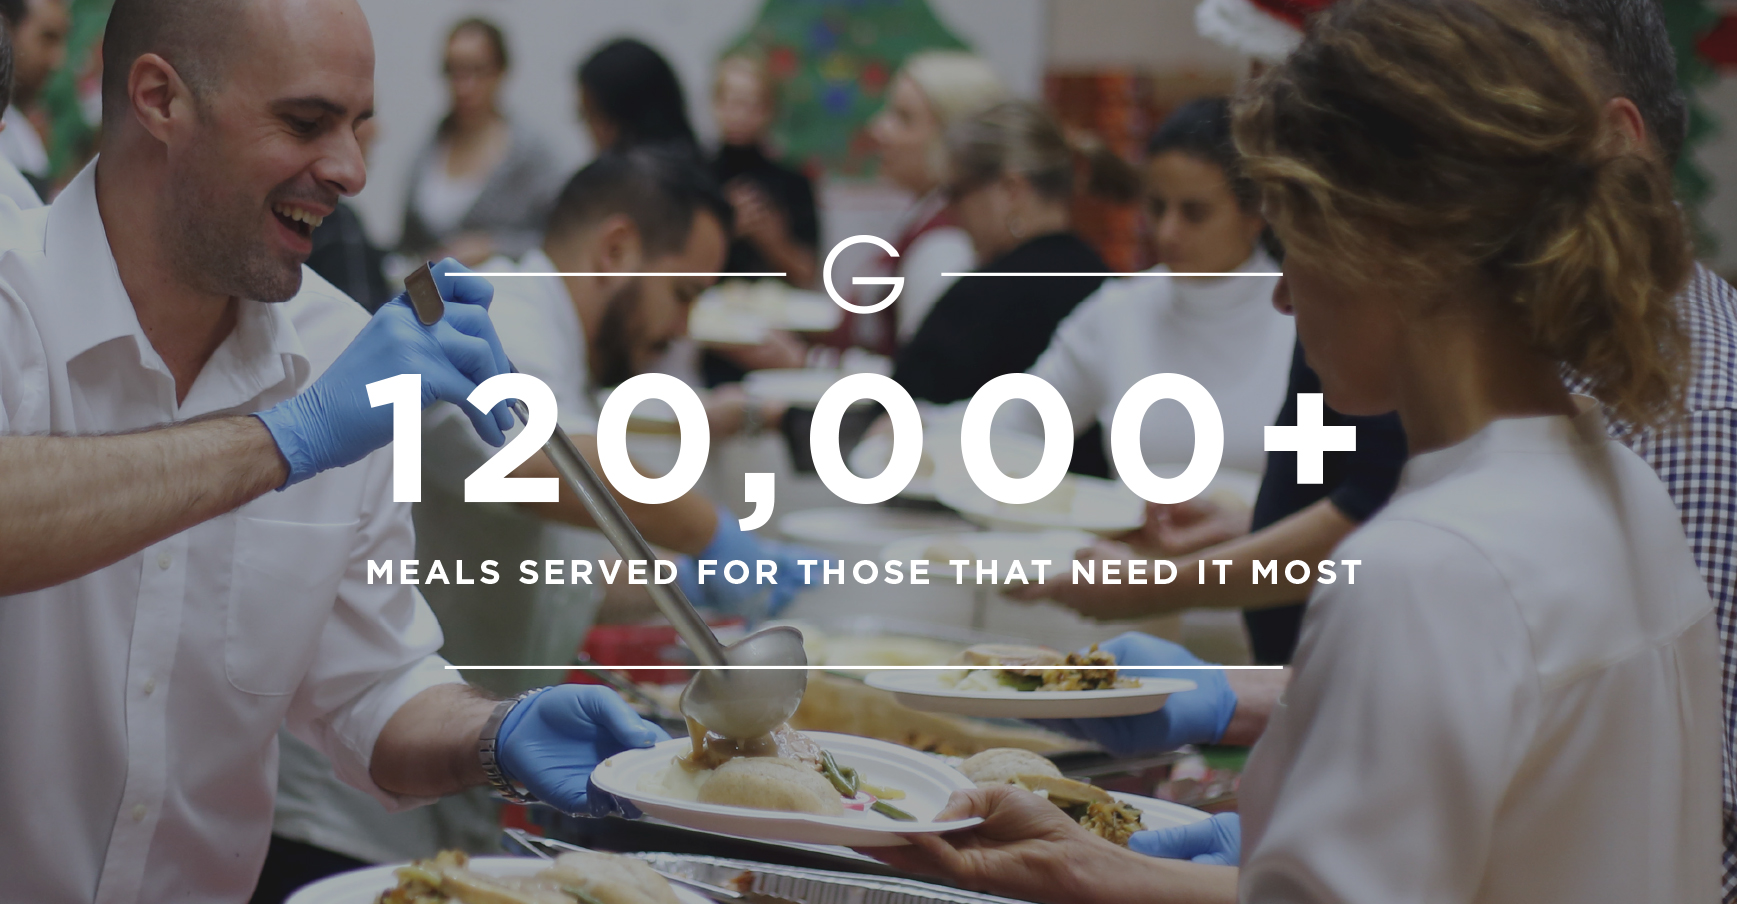 100,000+ MEALS SERVED FOR THOSE THAT NEED IT MOST